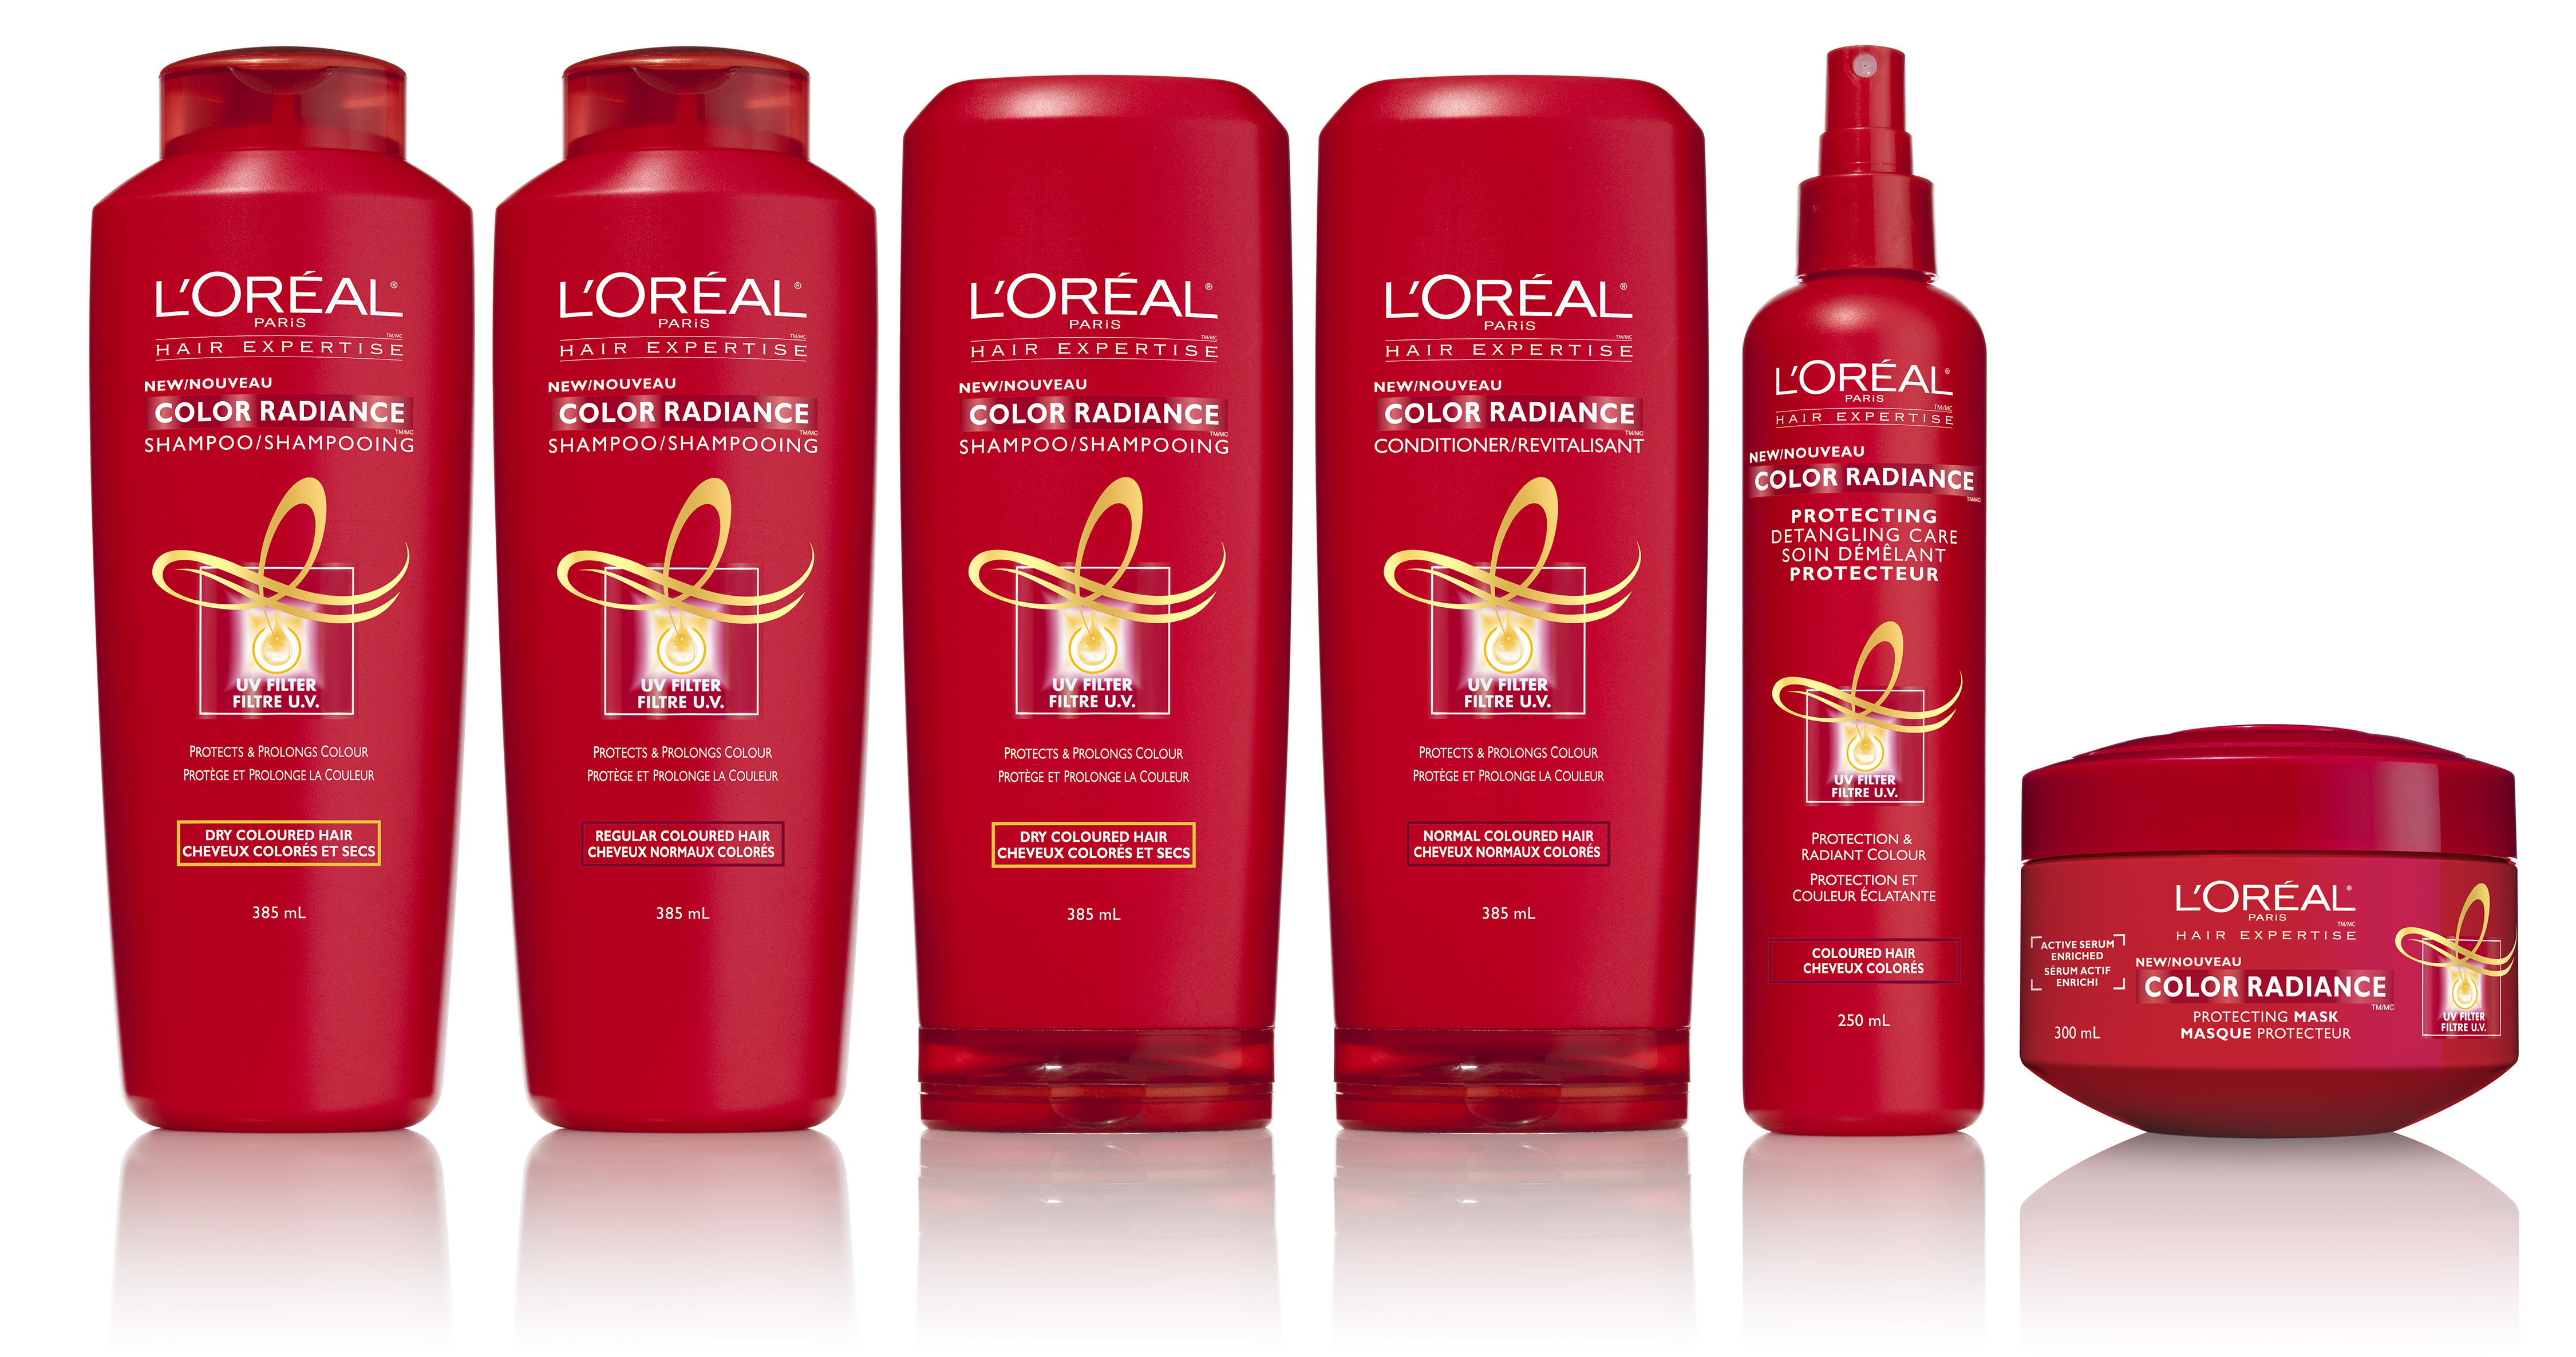 L'Oreal Hair Expertise Color Radiance Conditioner. 